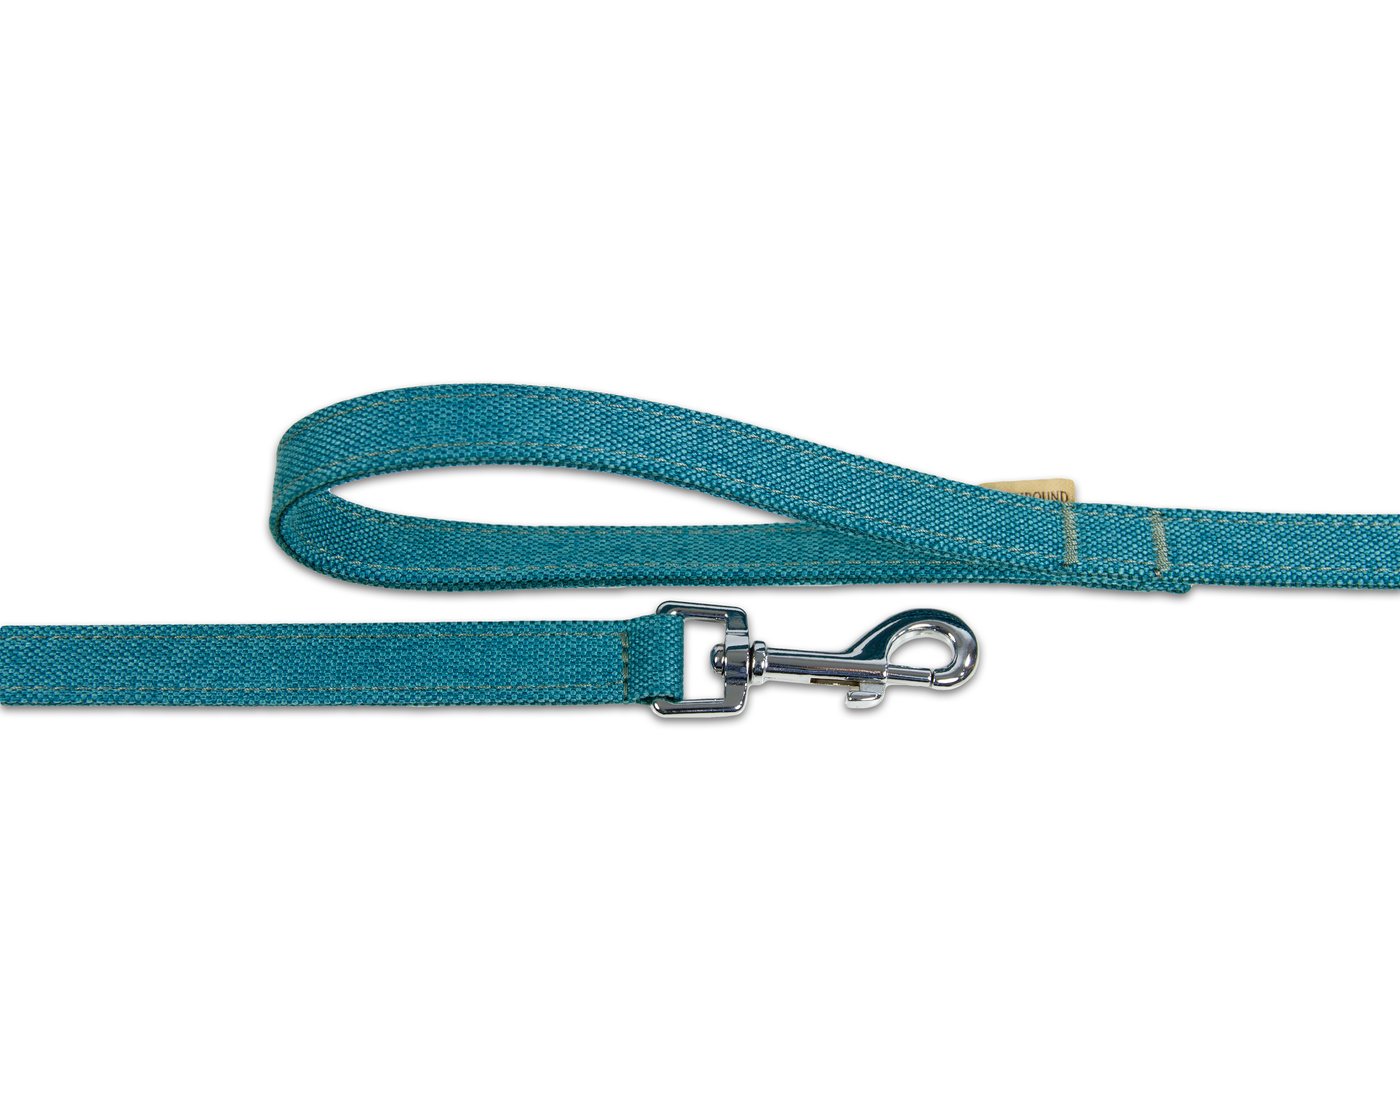 Close up of camden teal dog lead